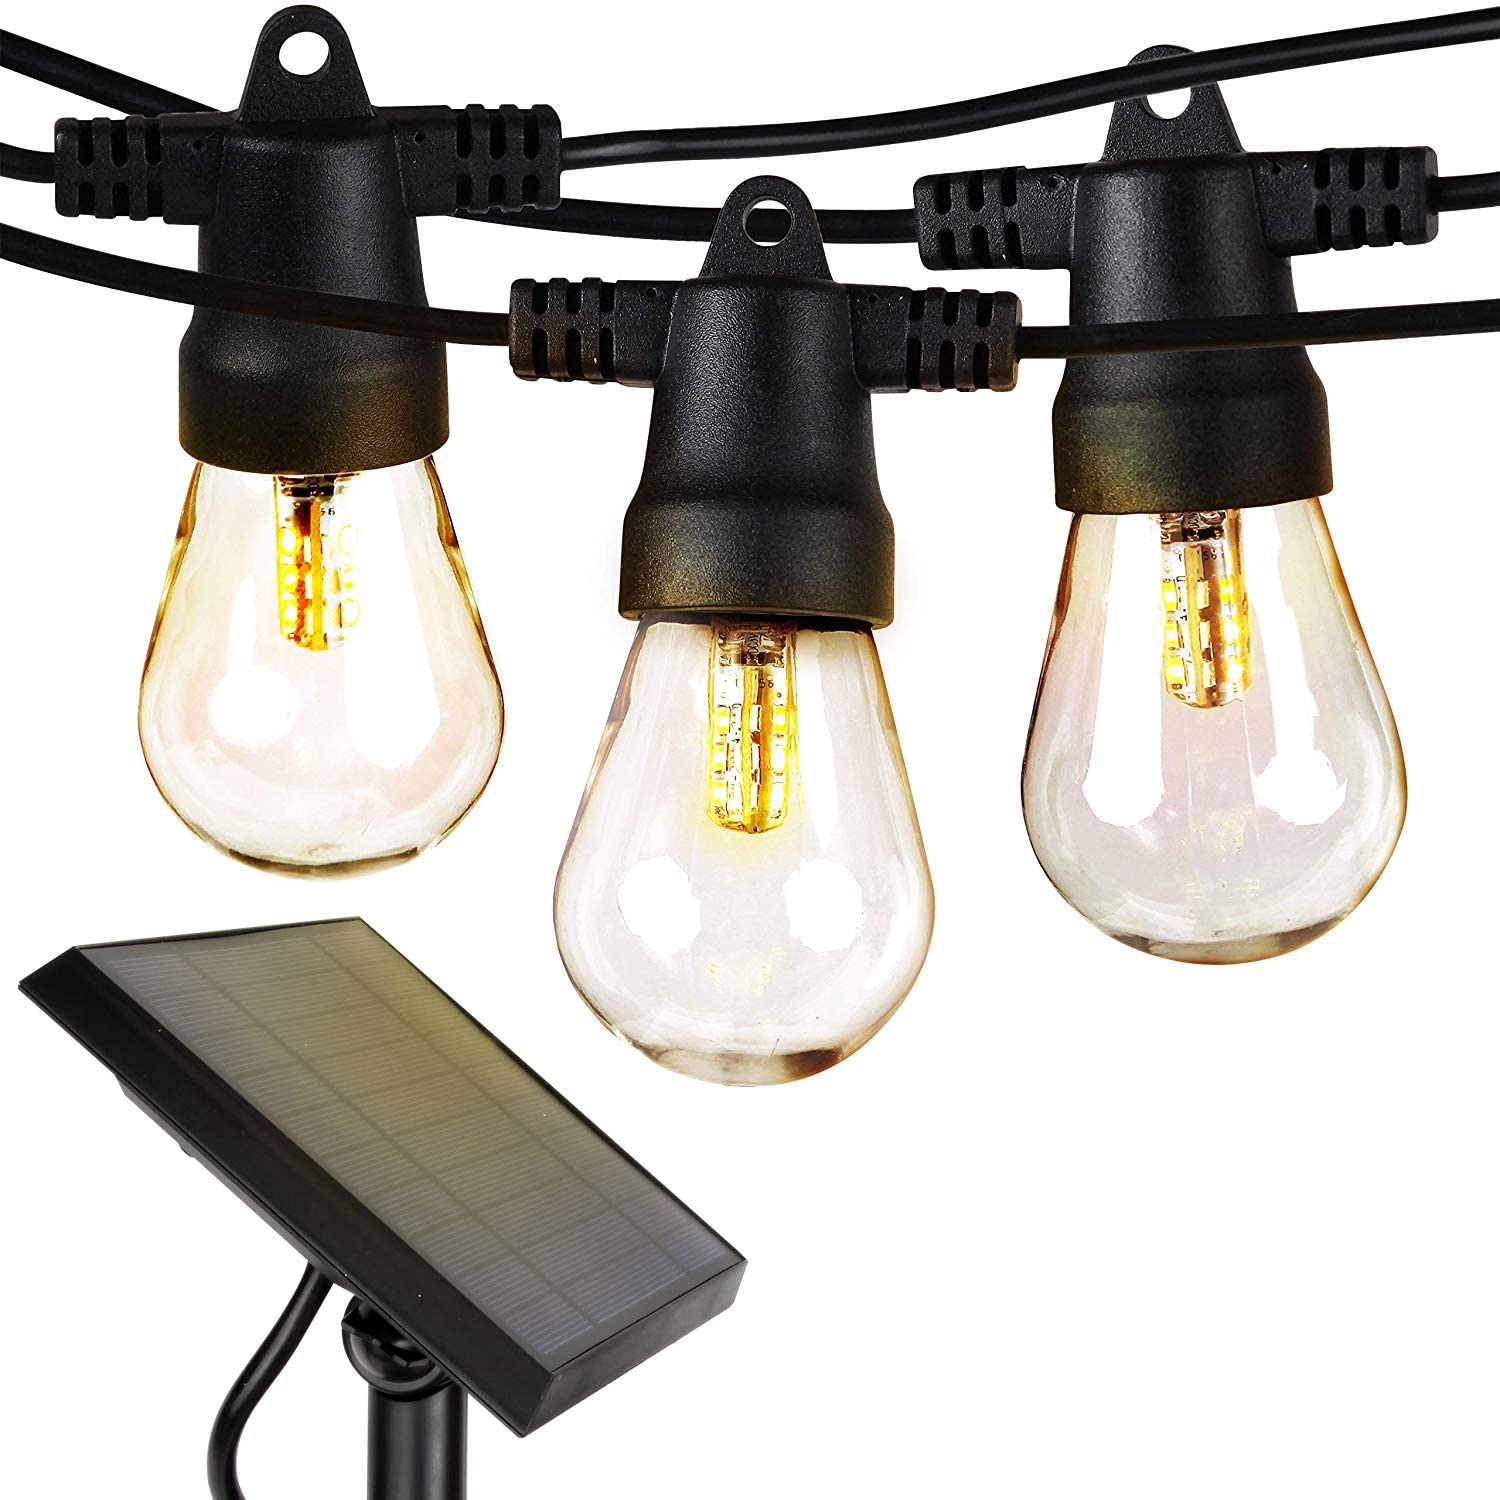 Brightech Ambience Pro Solar-Powered String Lights Logo